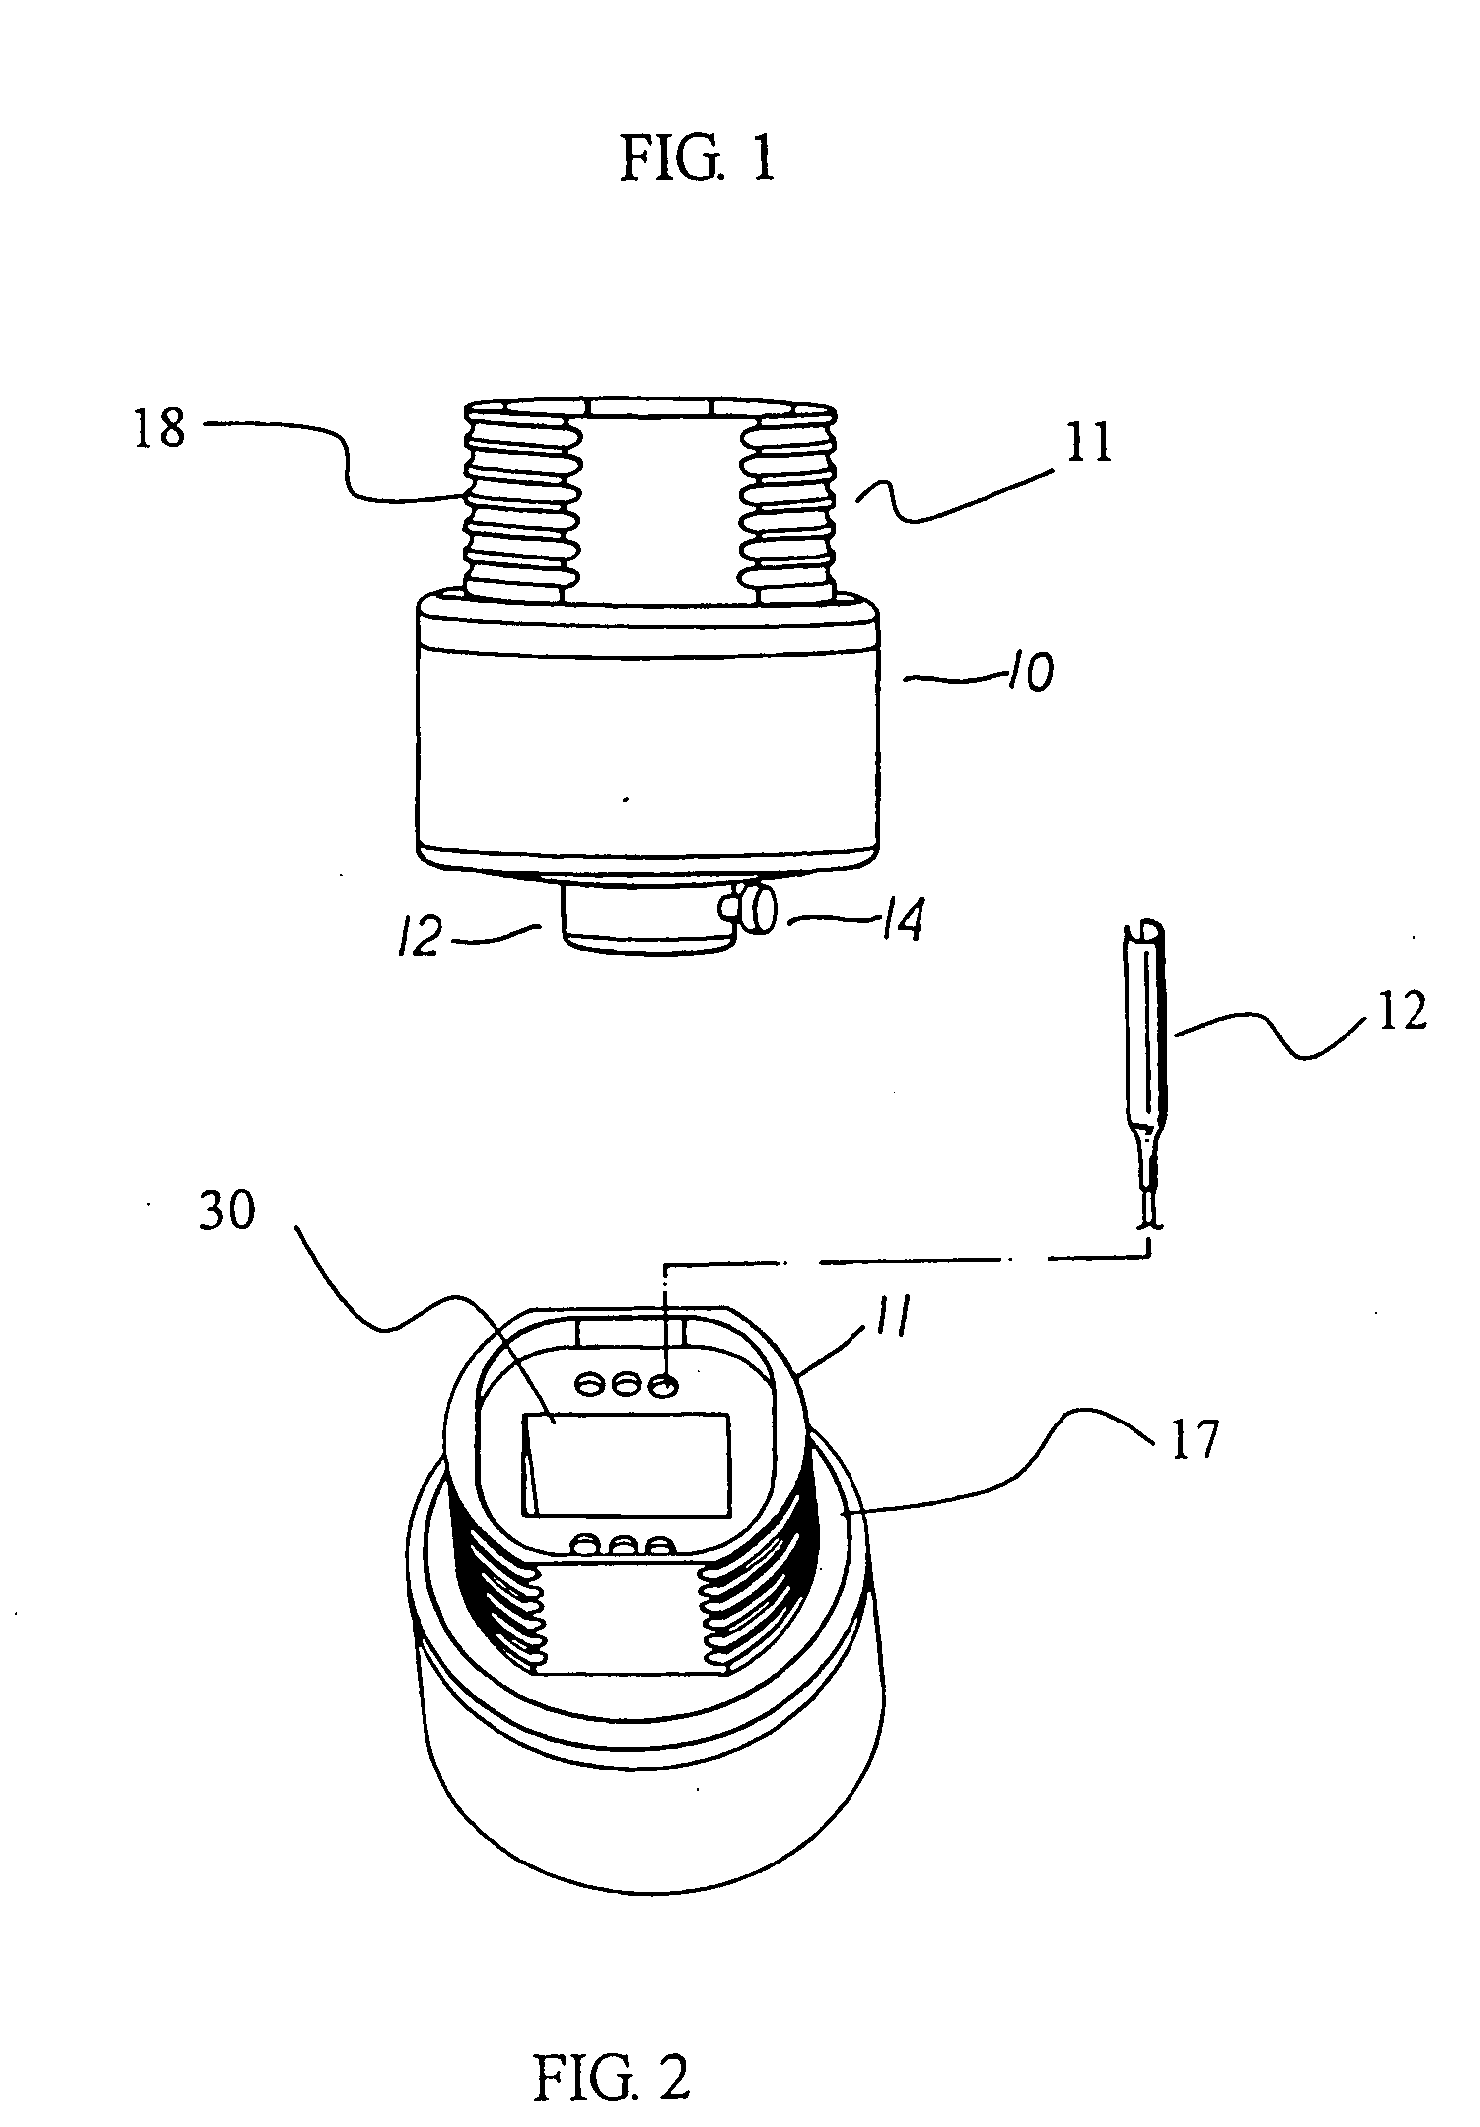 Lamp holder comprising lamp socket, ballast, and fastening mechanism, and lighting kit containing said lamp holder